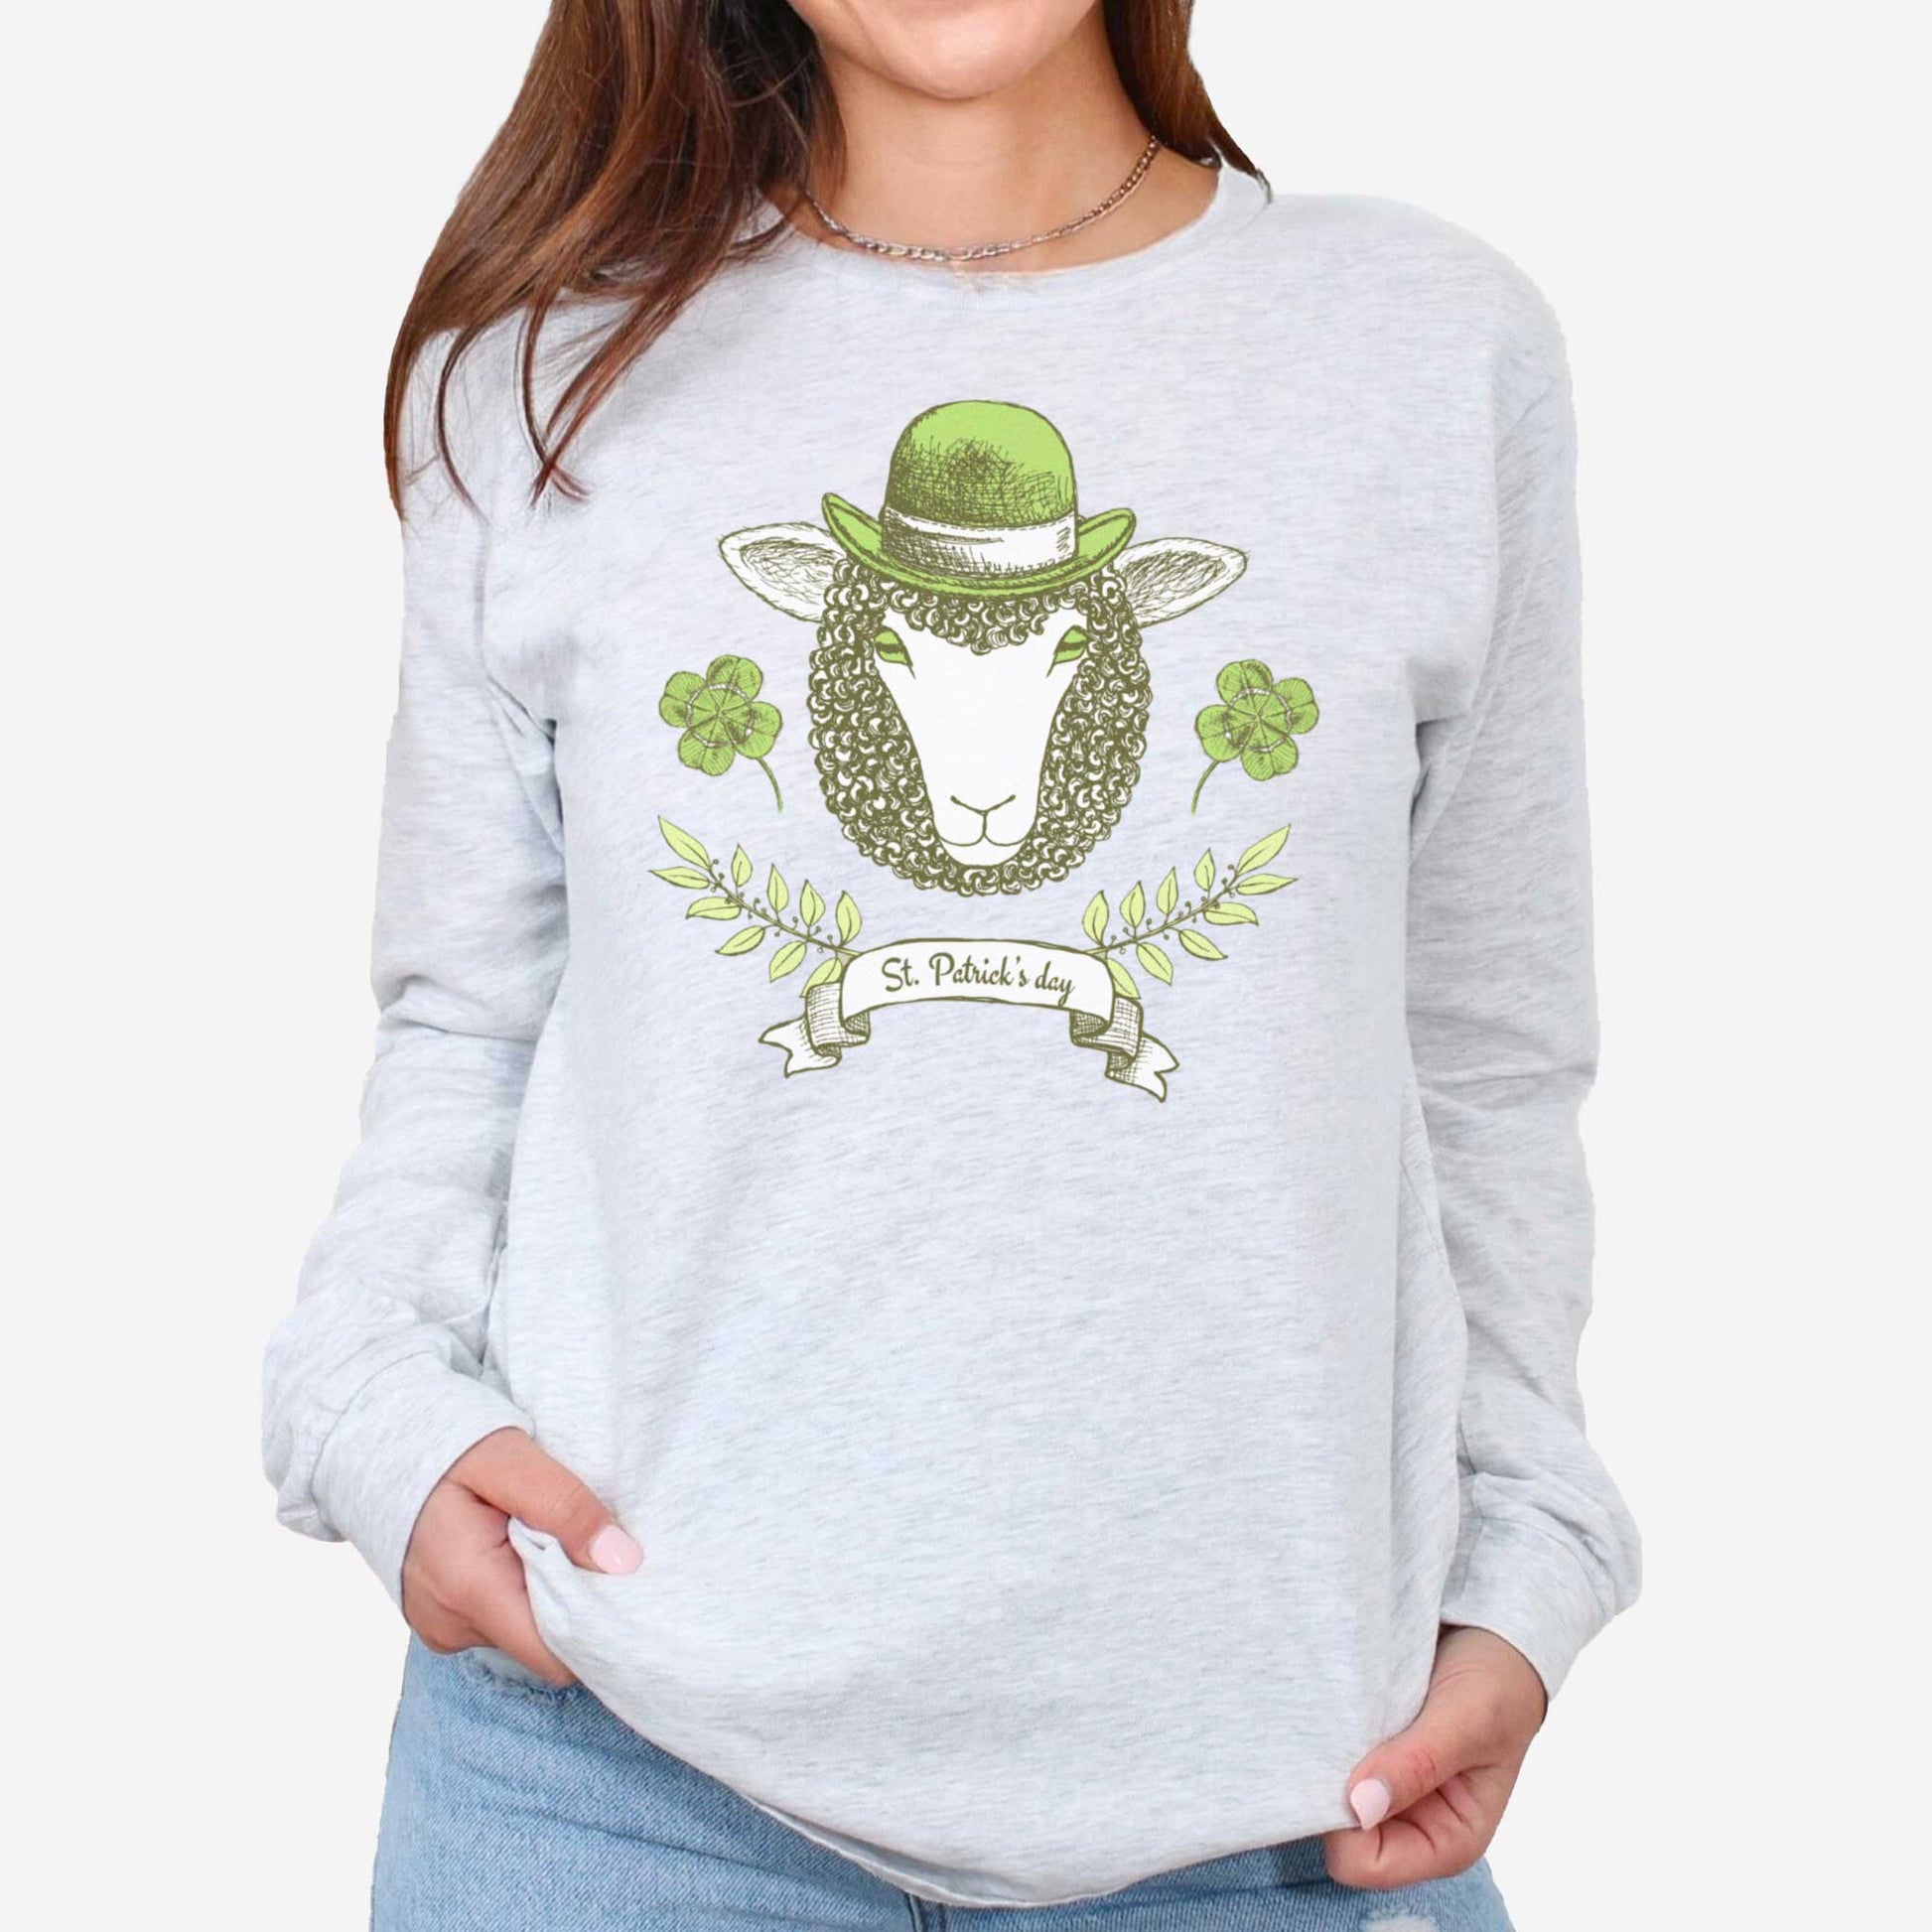 A woman wearing a long sleeved ash Bella Canvas t-shirt featuring a sheep with a green hat, clovers and the words St.Patrick's Day.